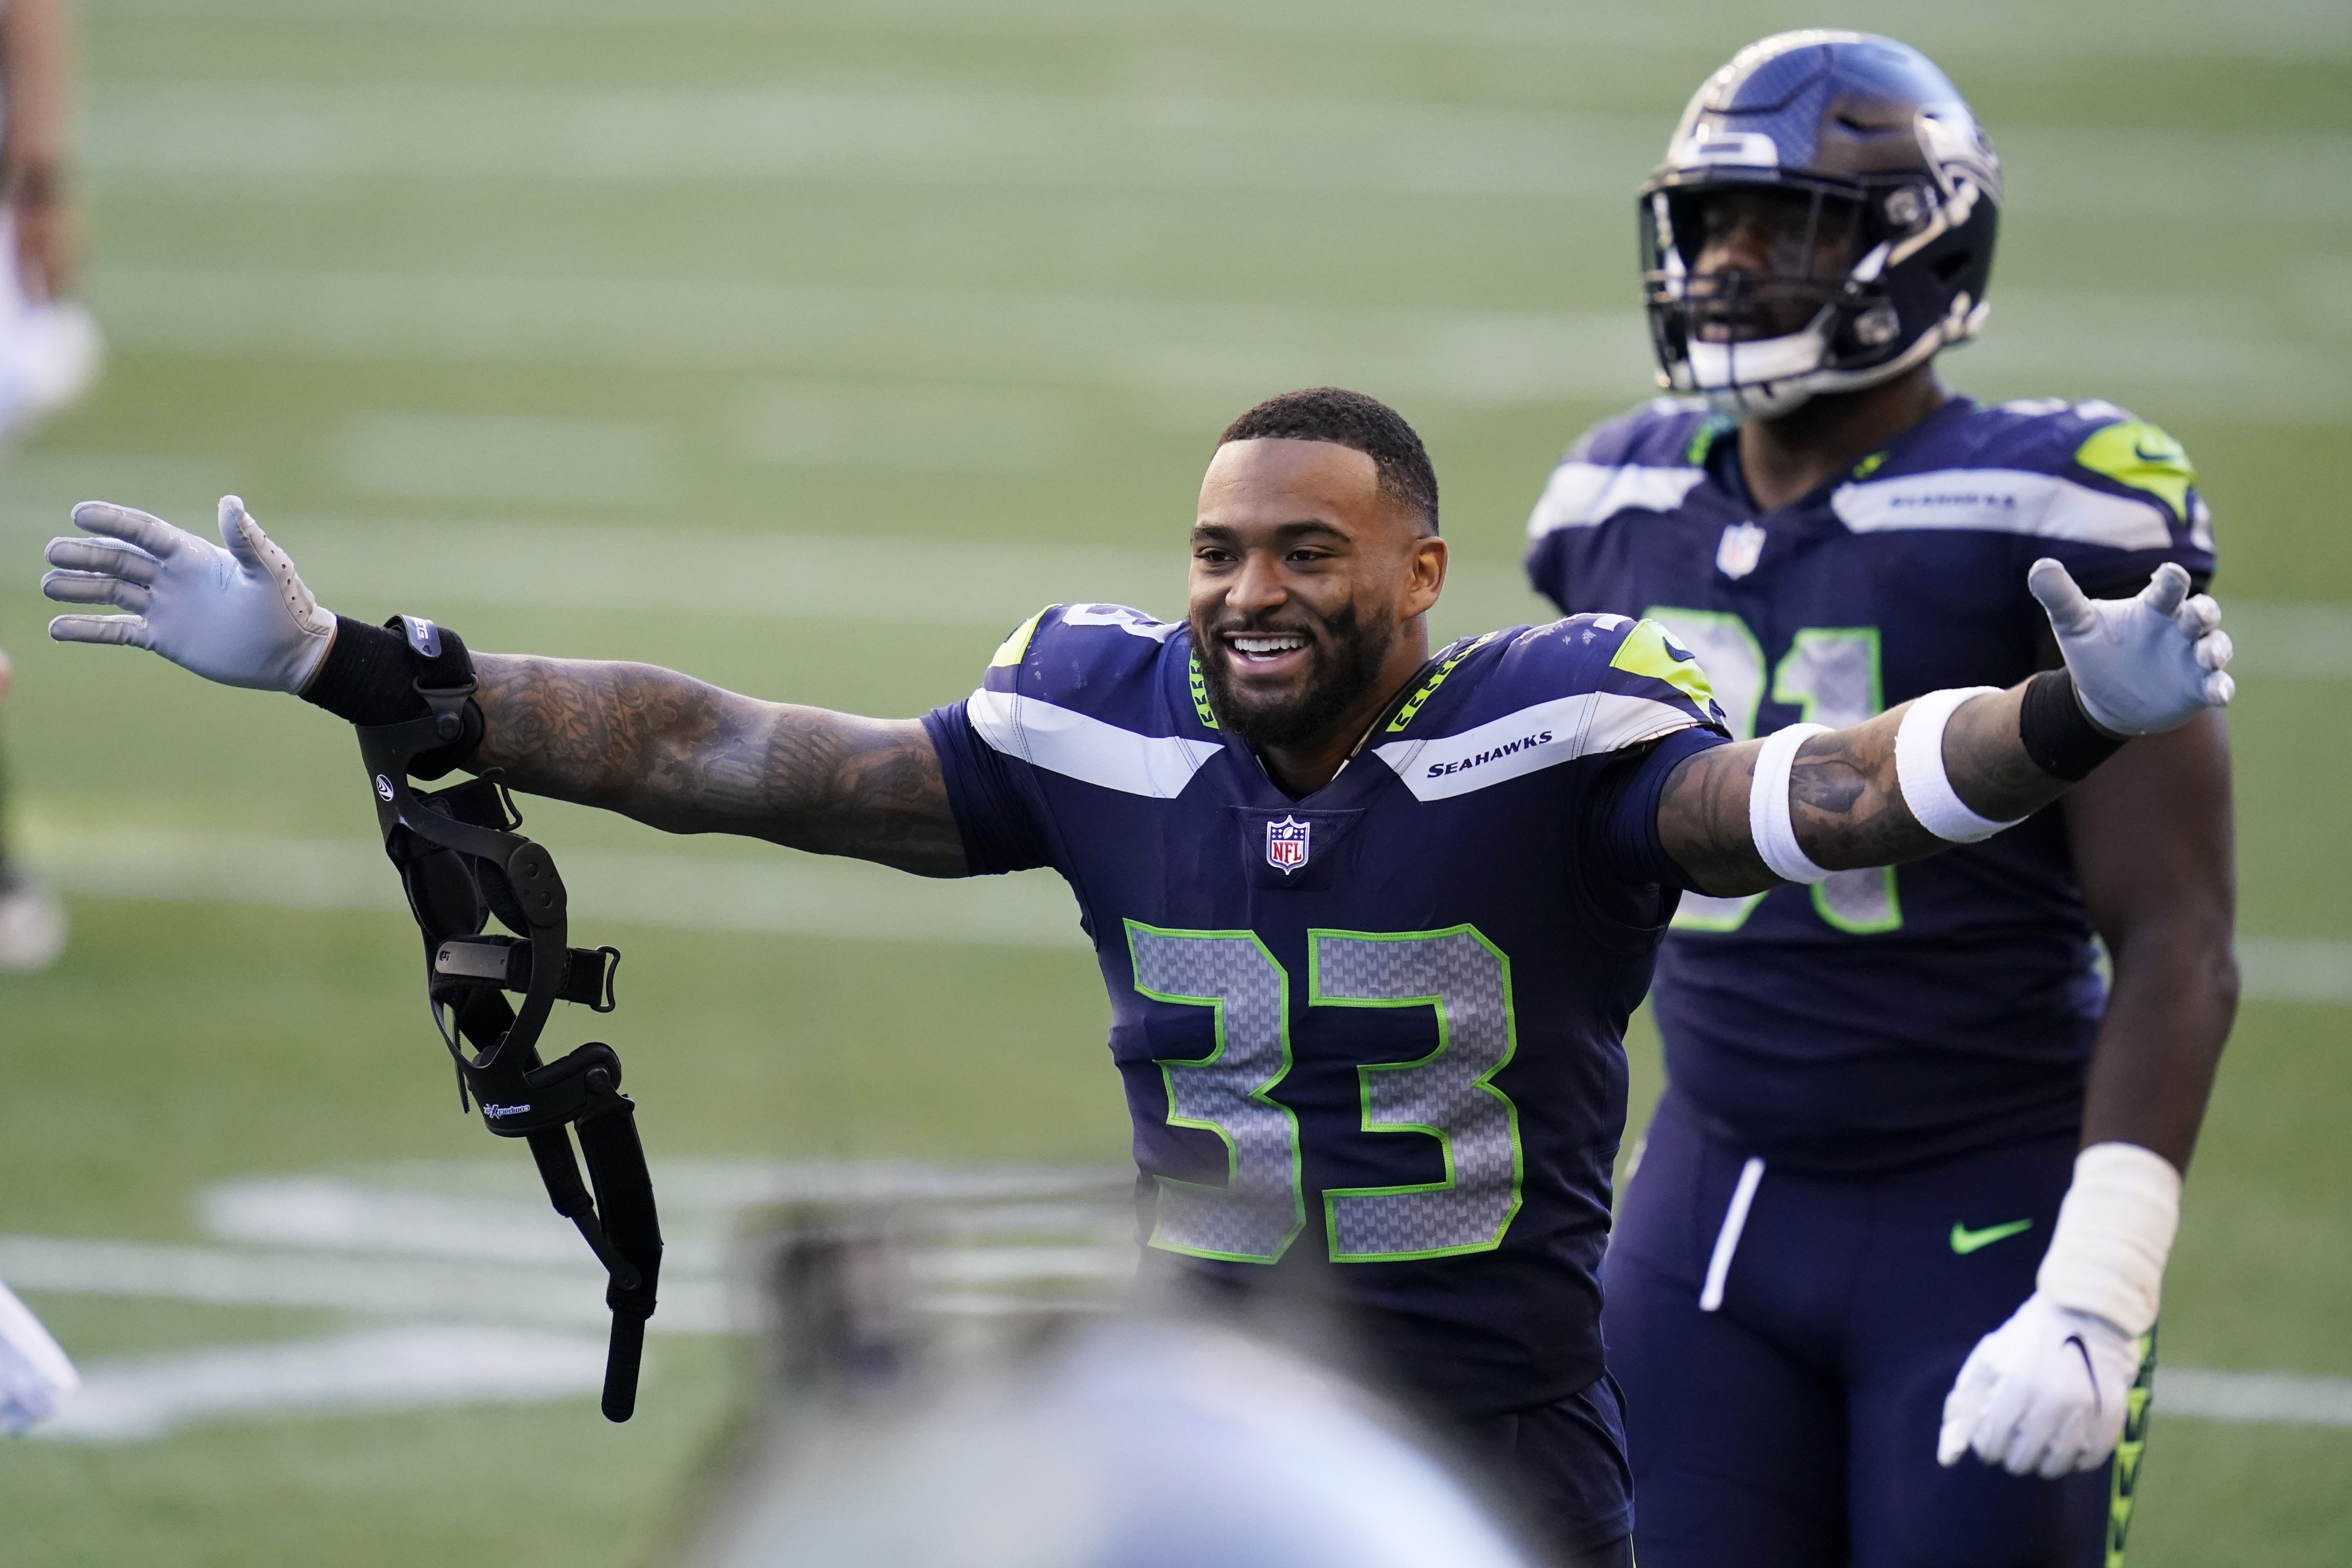 Seattle Seahawks' safety Jamal Adams was expected to practice, but